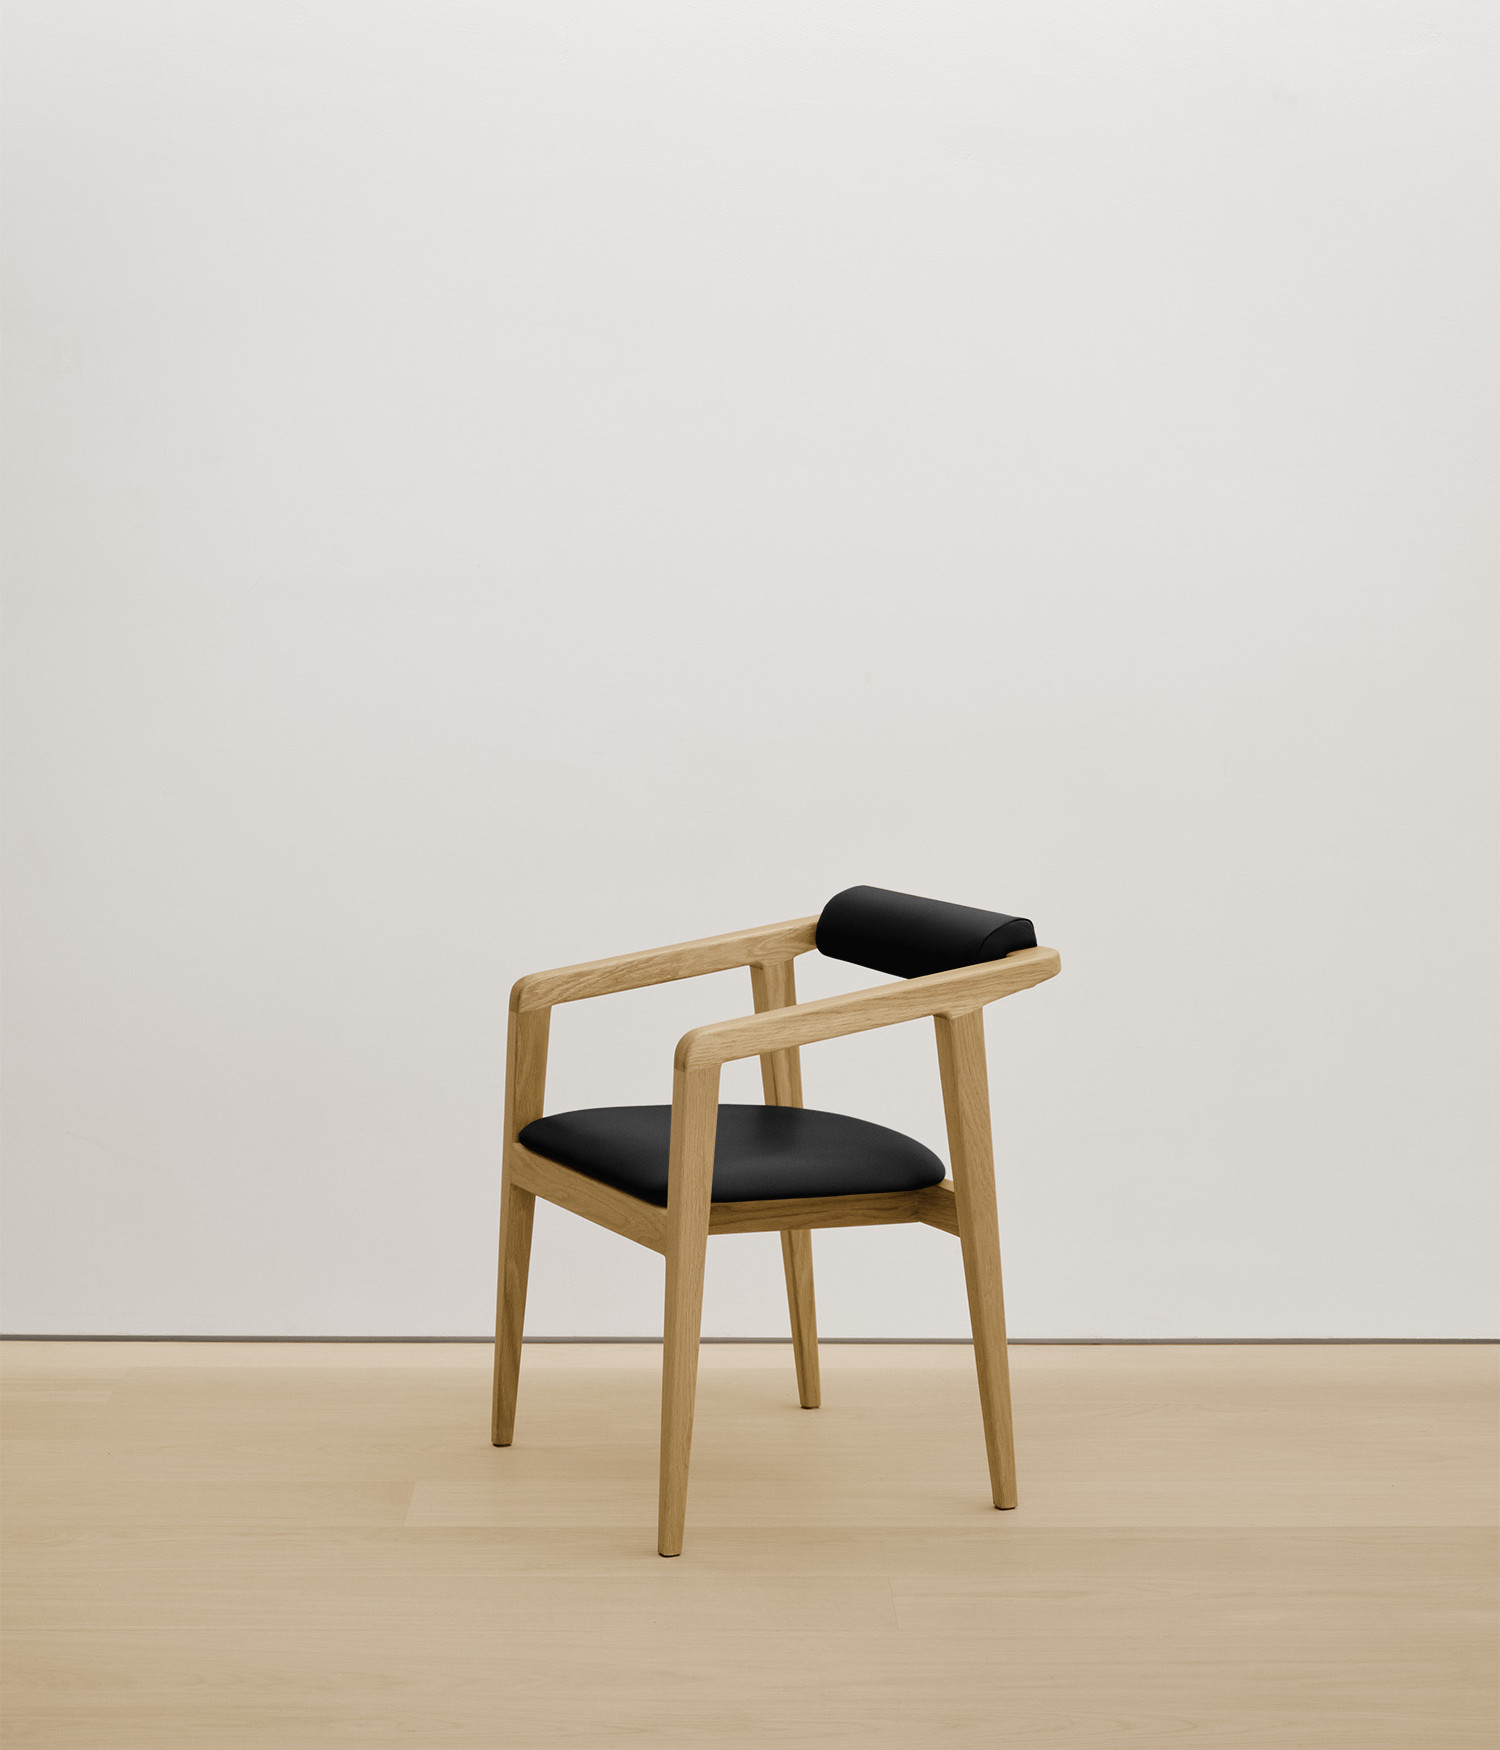  white-oak chair with black color upholstered seat